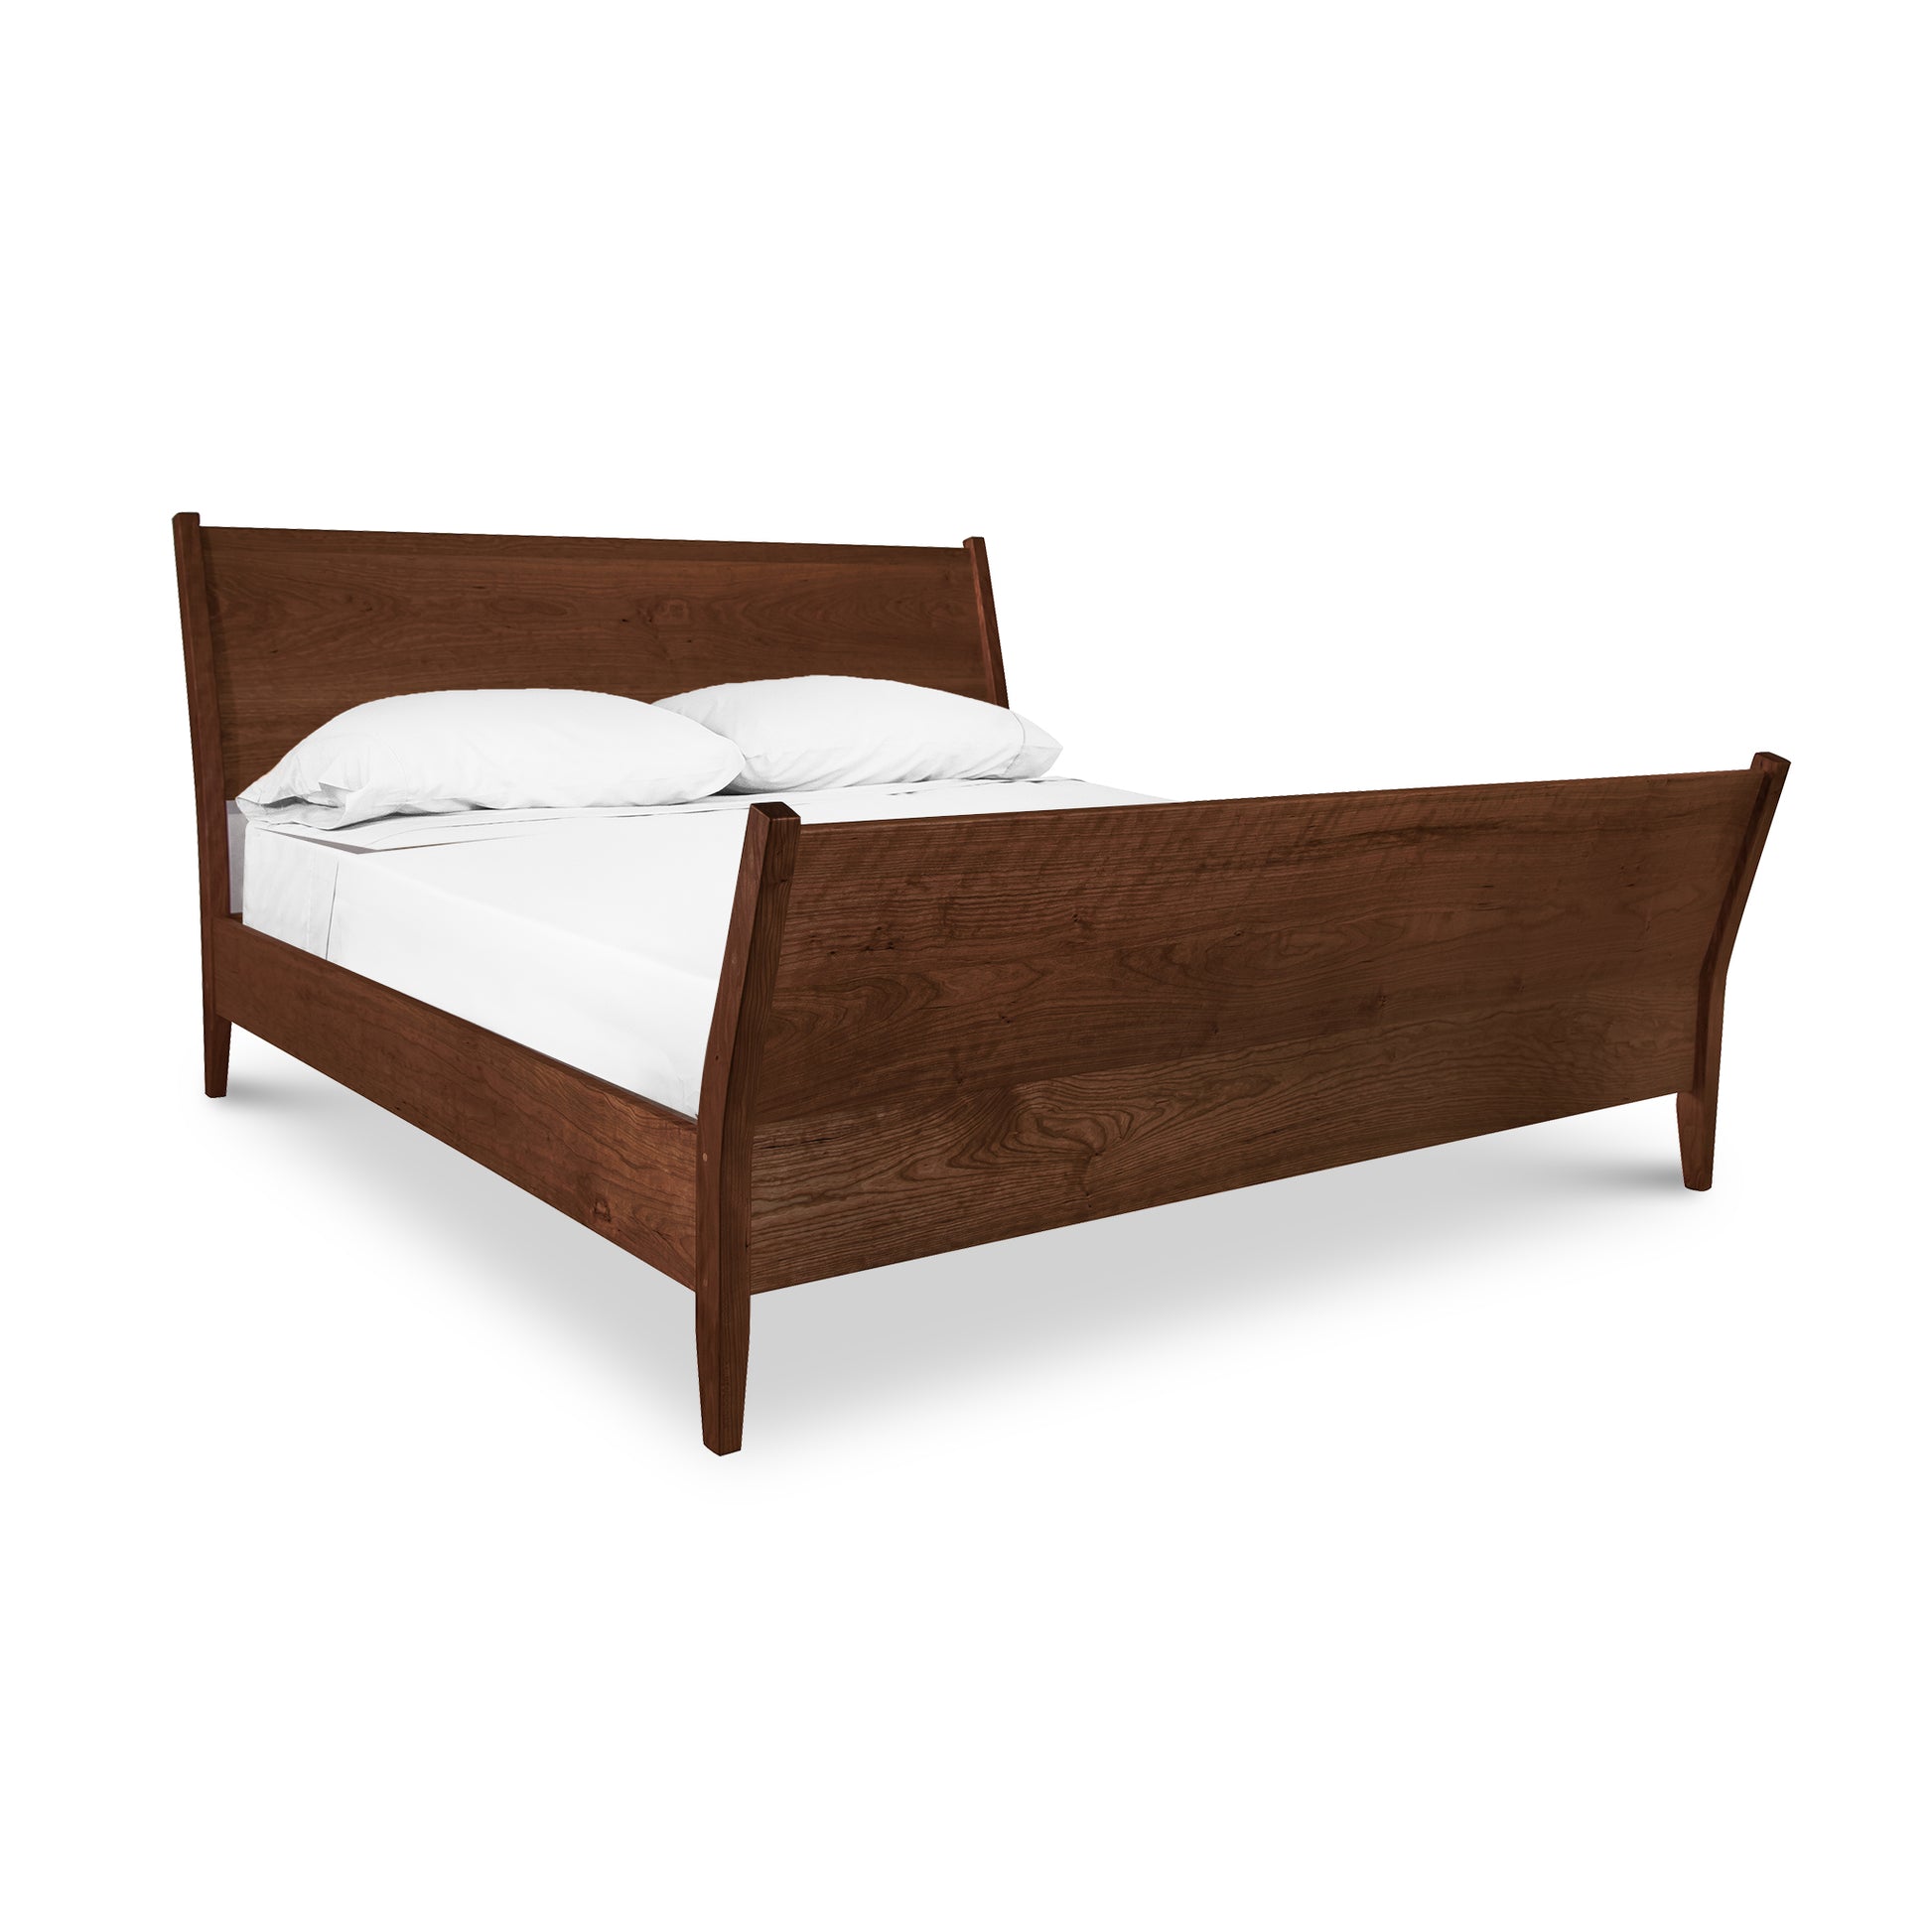 A Maple Corner Woodworks Andover Modern Incline Sleigh Bed with a curved headboard and footboard, furnished with white bedding, isolated on a white background.